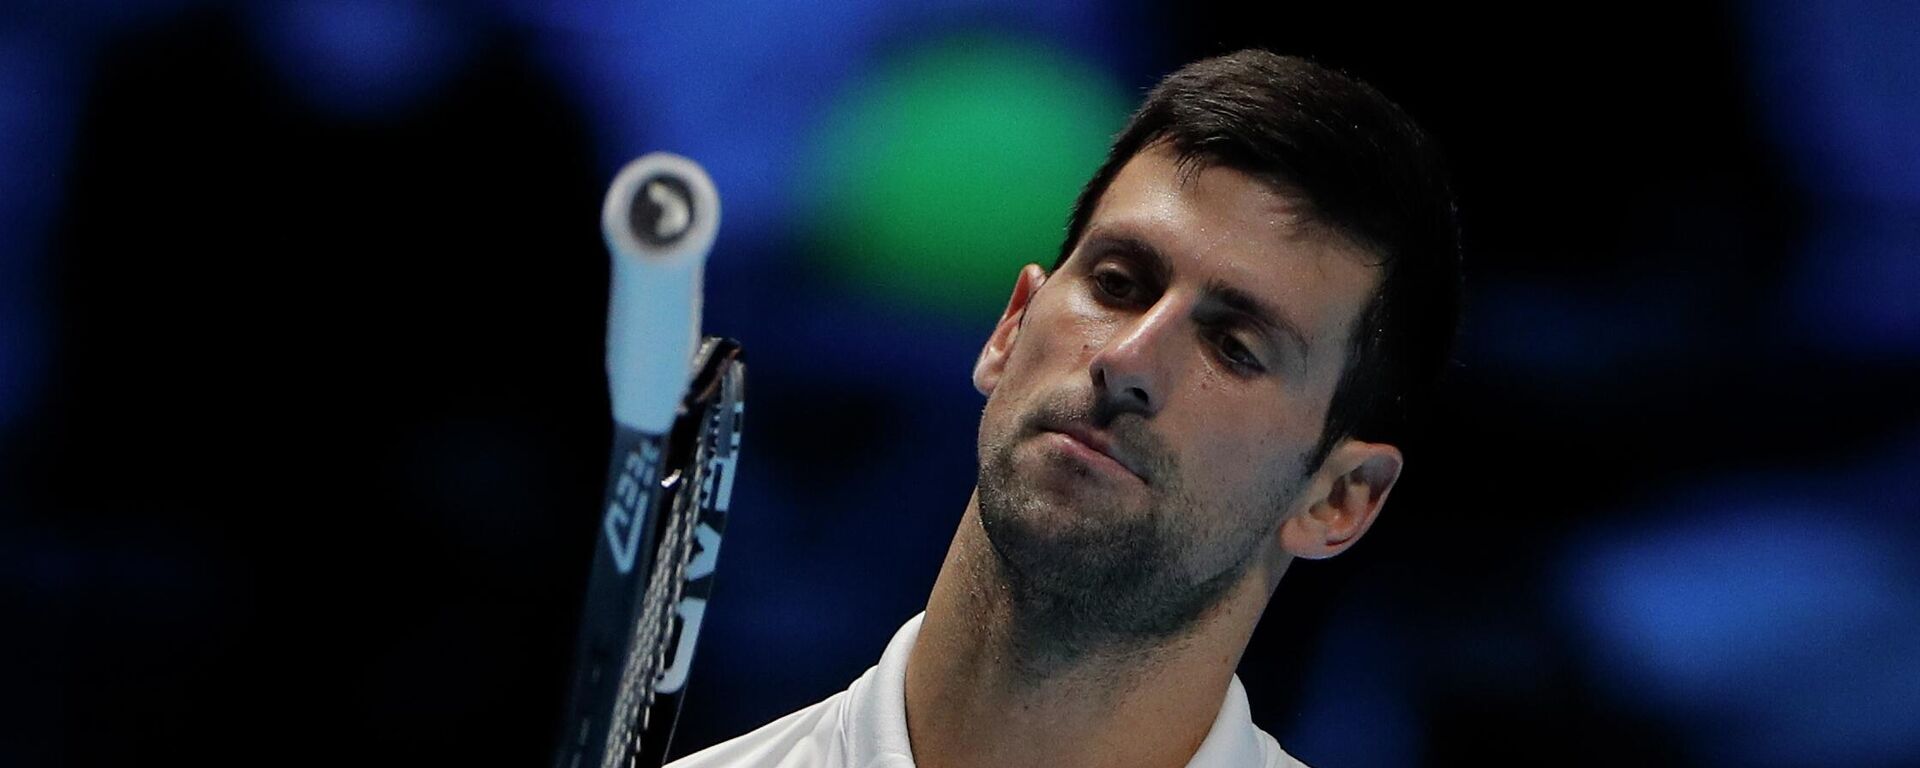 Serbia's Novak Djokovic reacts during his group stage match against Britain's Cameron Norrie - Sputnik International, 1920, 19.11.2021